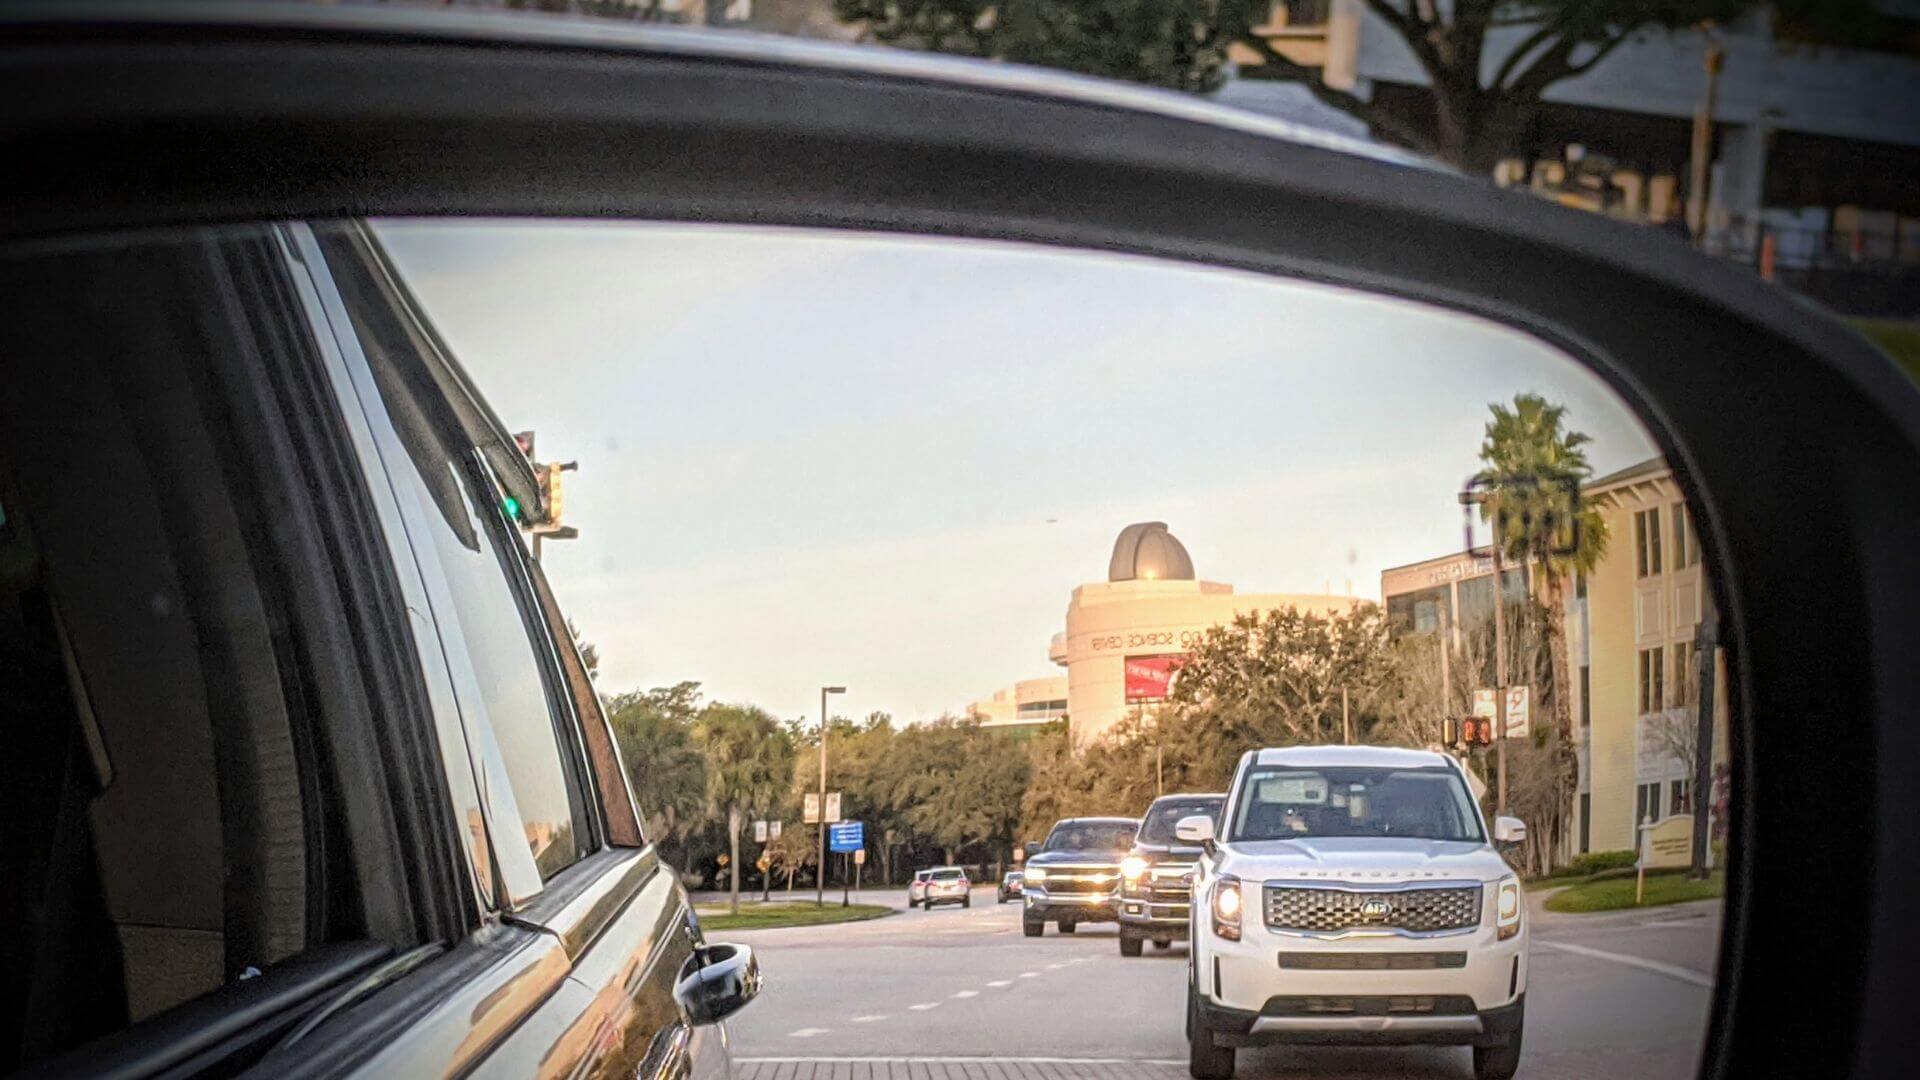 Orlando Science Center in the rearview mirror of a car